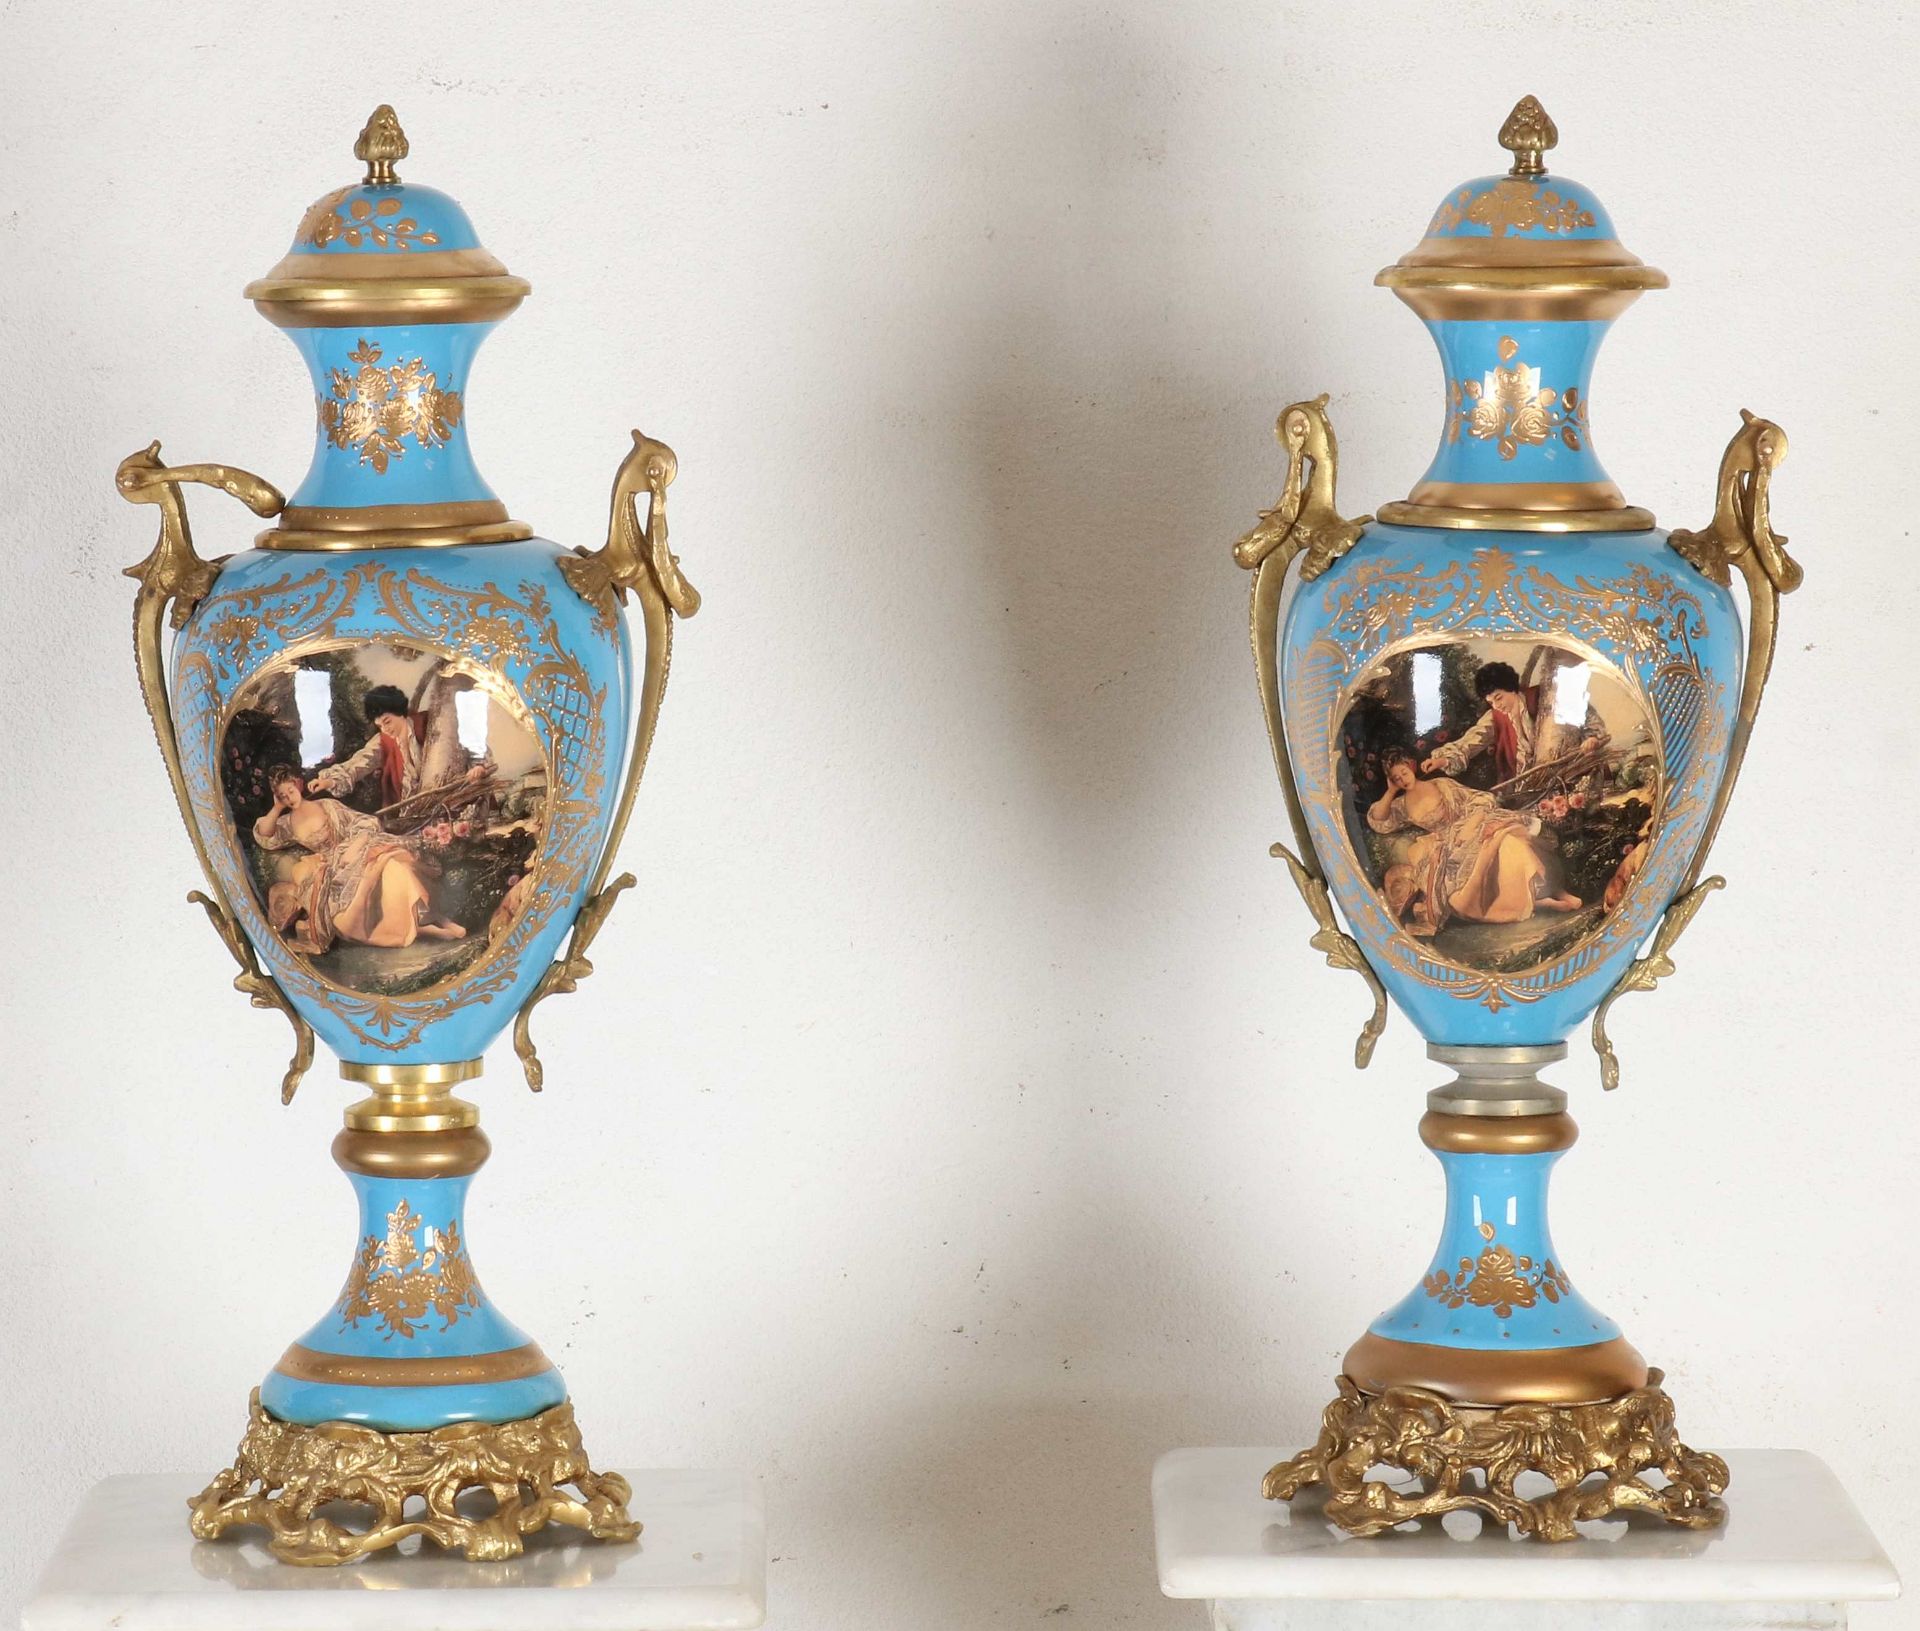 Two Sevres style piedestals + vases - Image 2 of 3